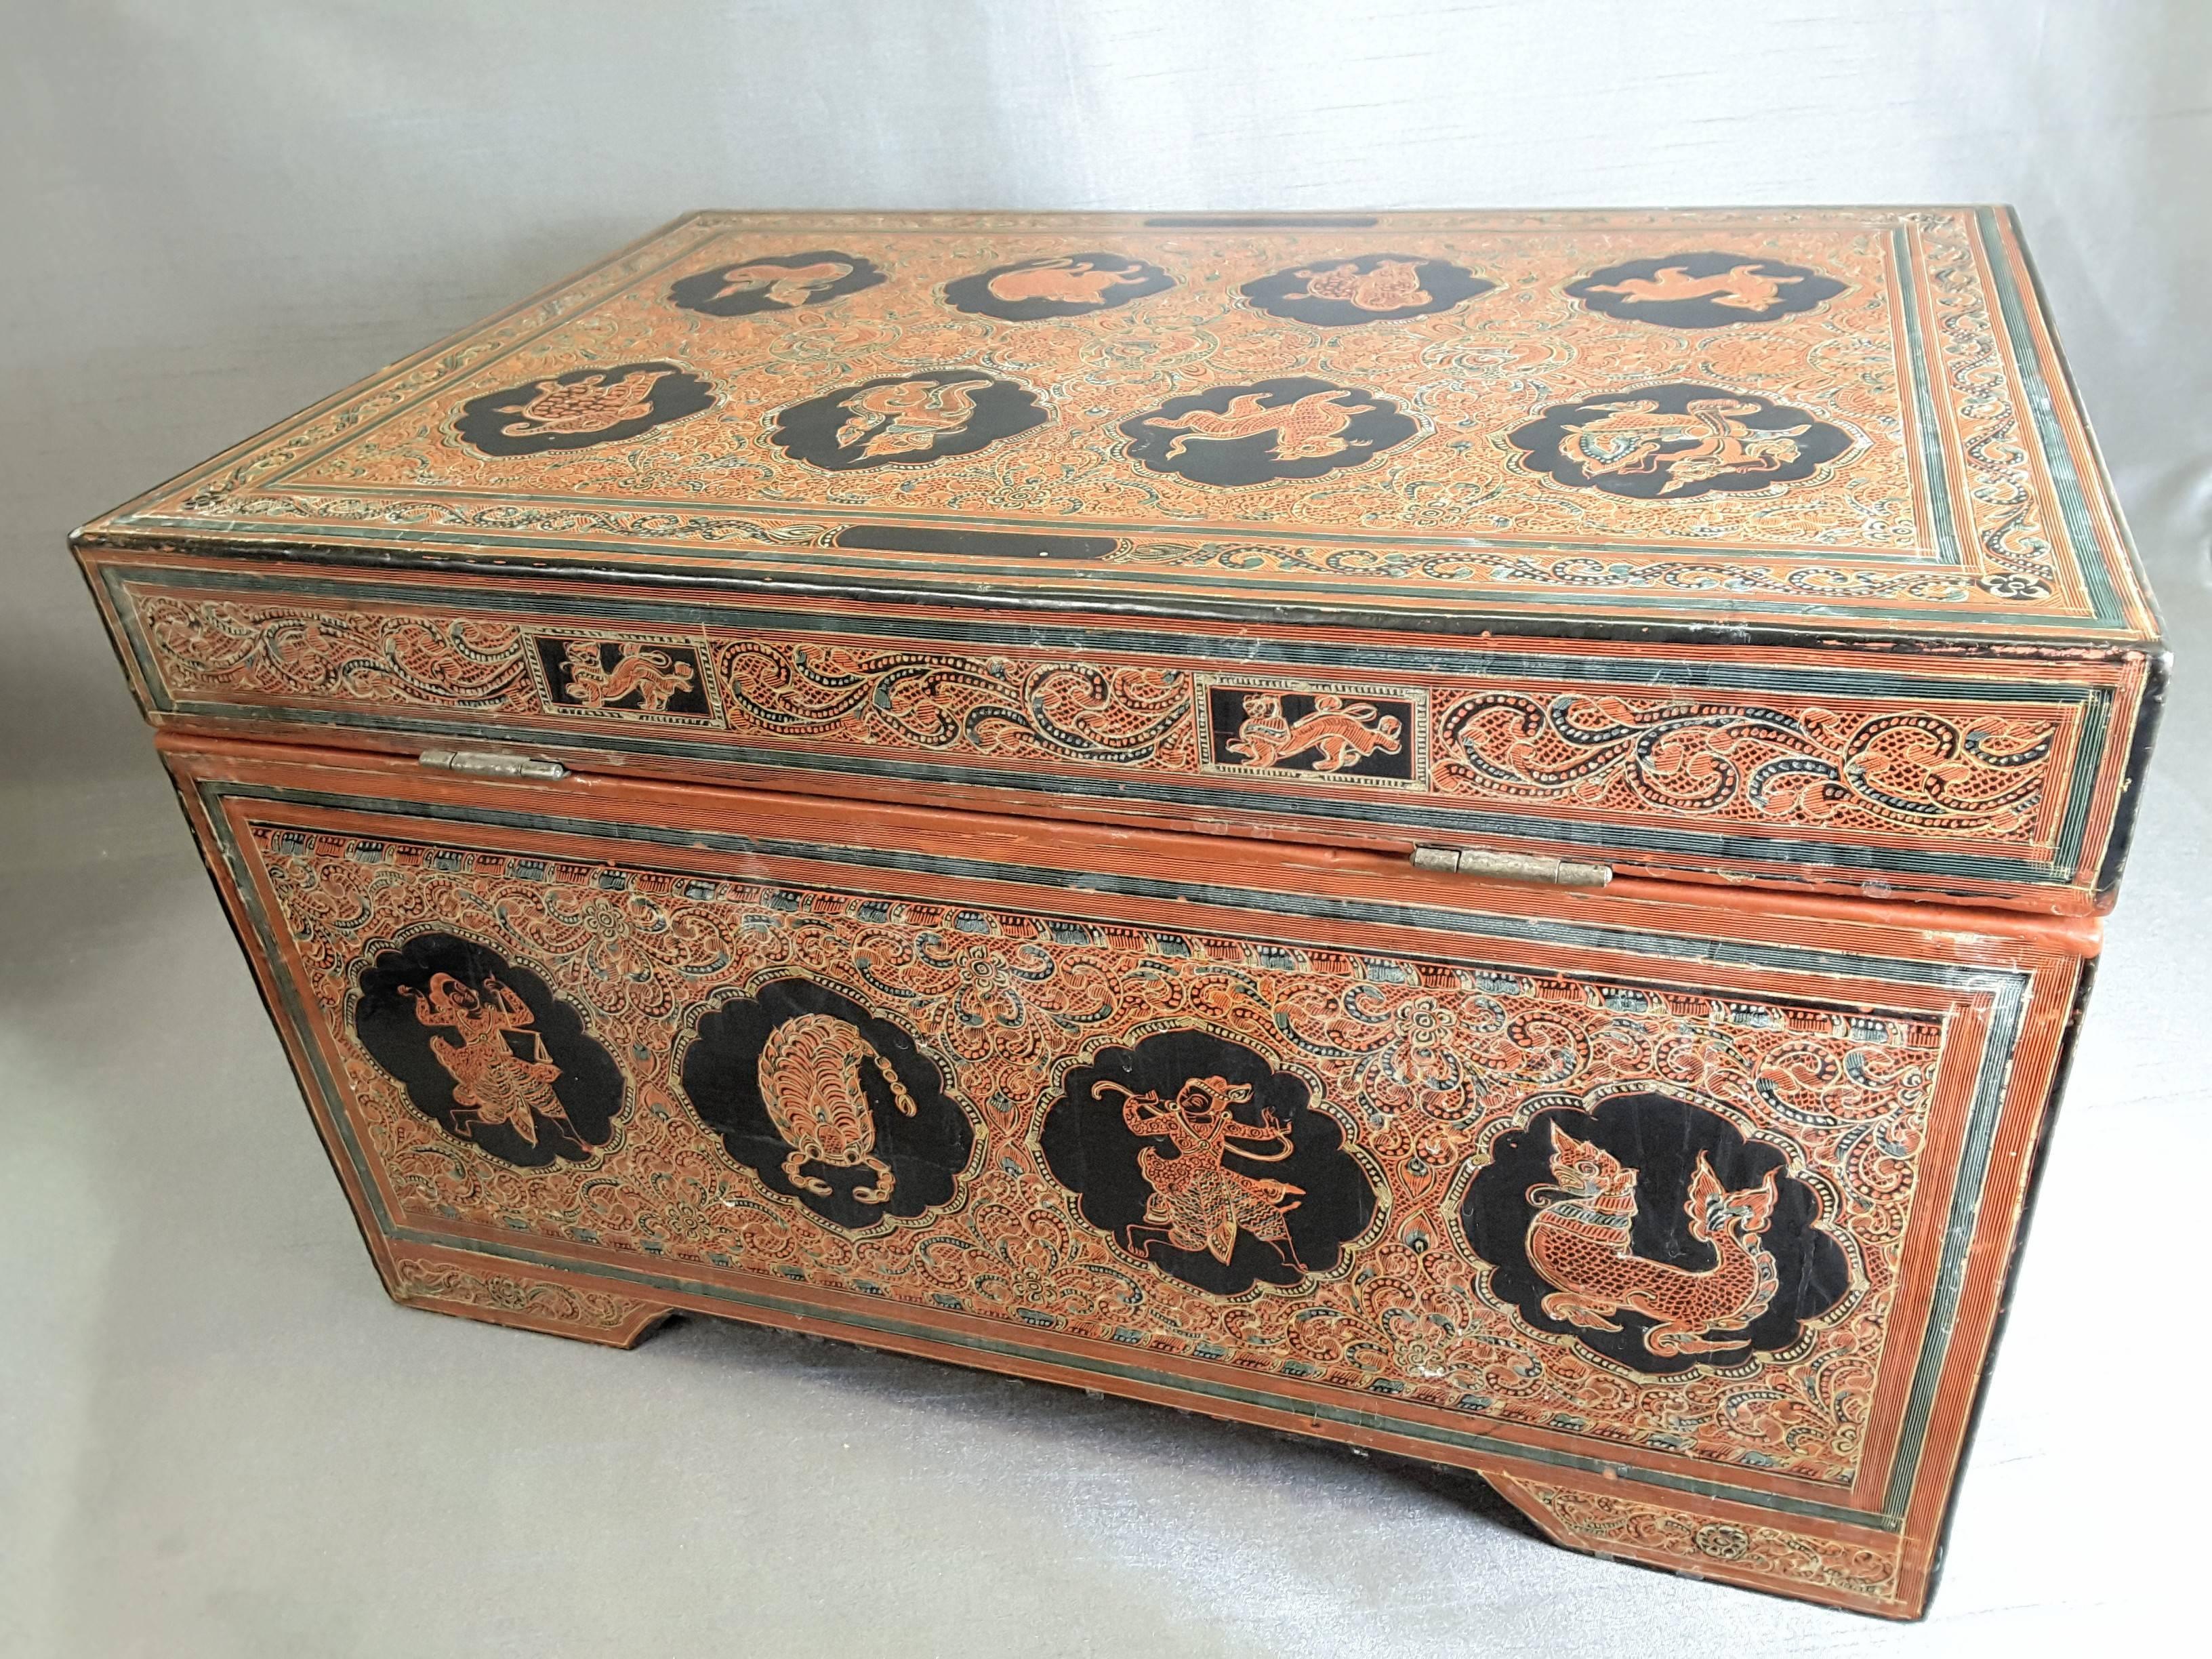 South East Asian Document/Storage Box In Excellent Condition For Sale In Ottawa, Ontario